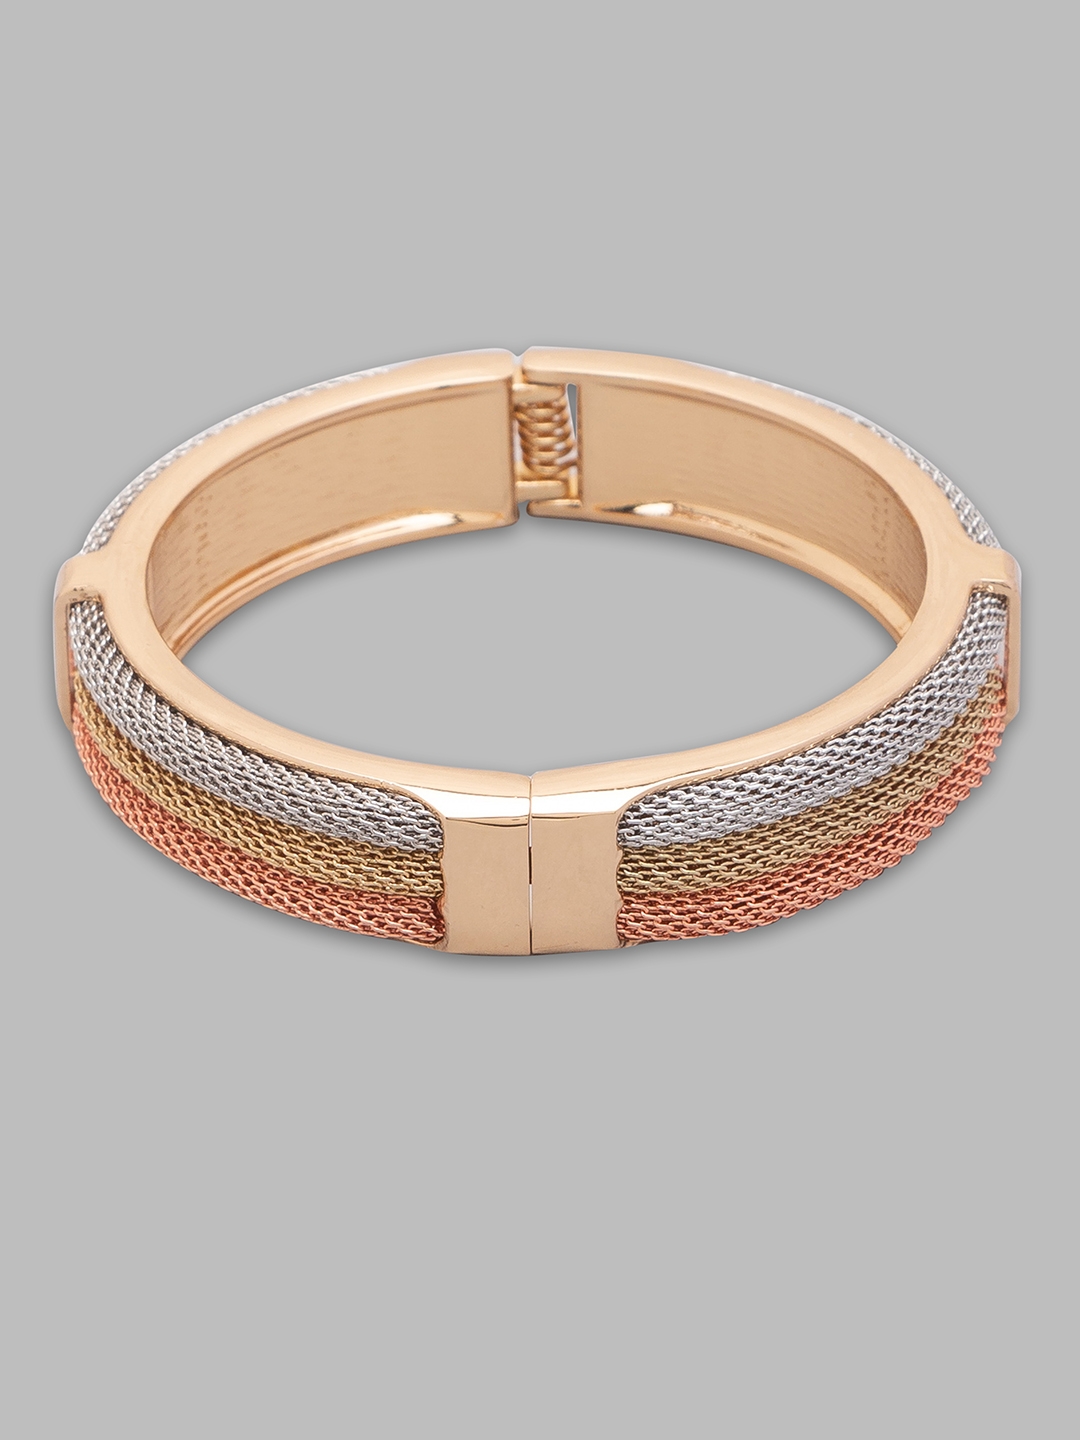 Exclusive Luxuria Collection Hearts Design Rose Gold Plated Bracelet For  Women